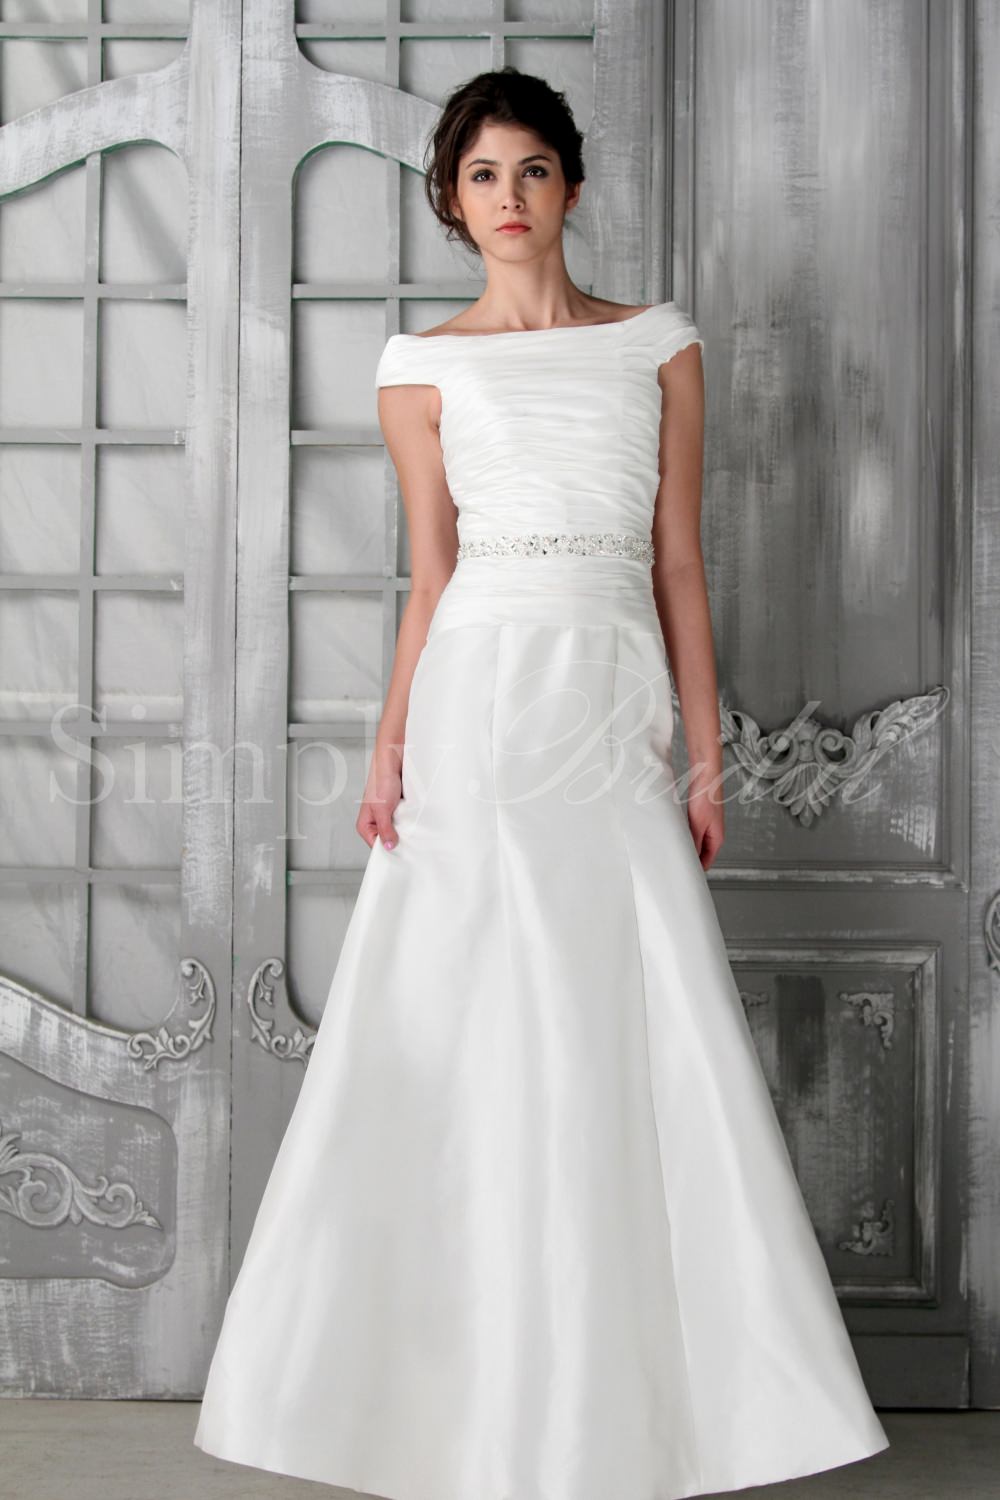 2013 wedding dress trends bride in white dress guest post by lavimage montreal